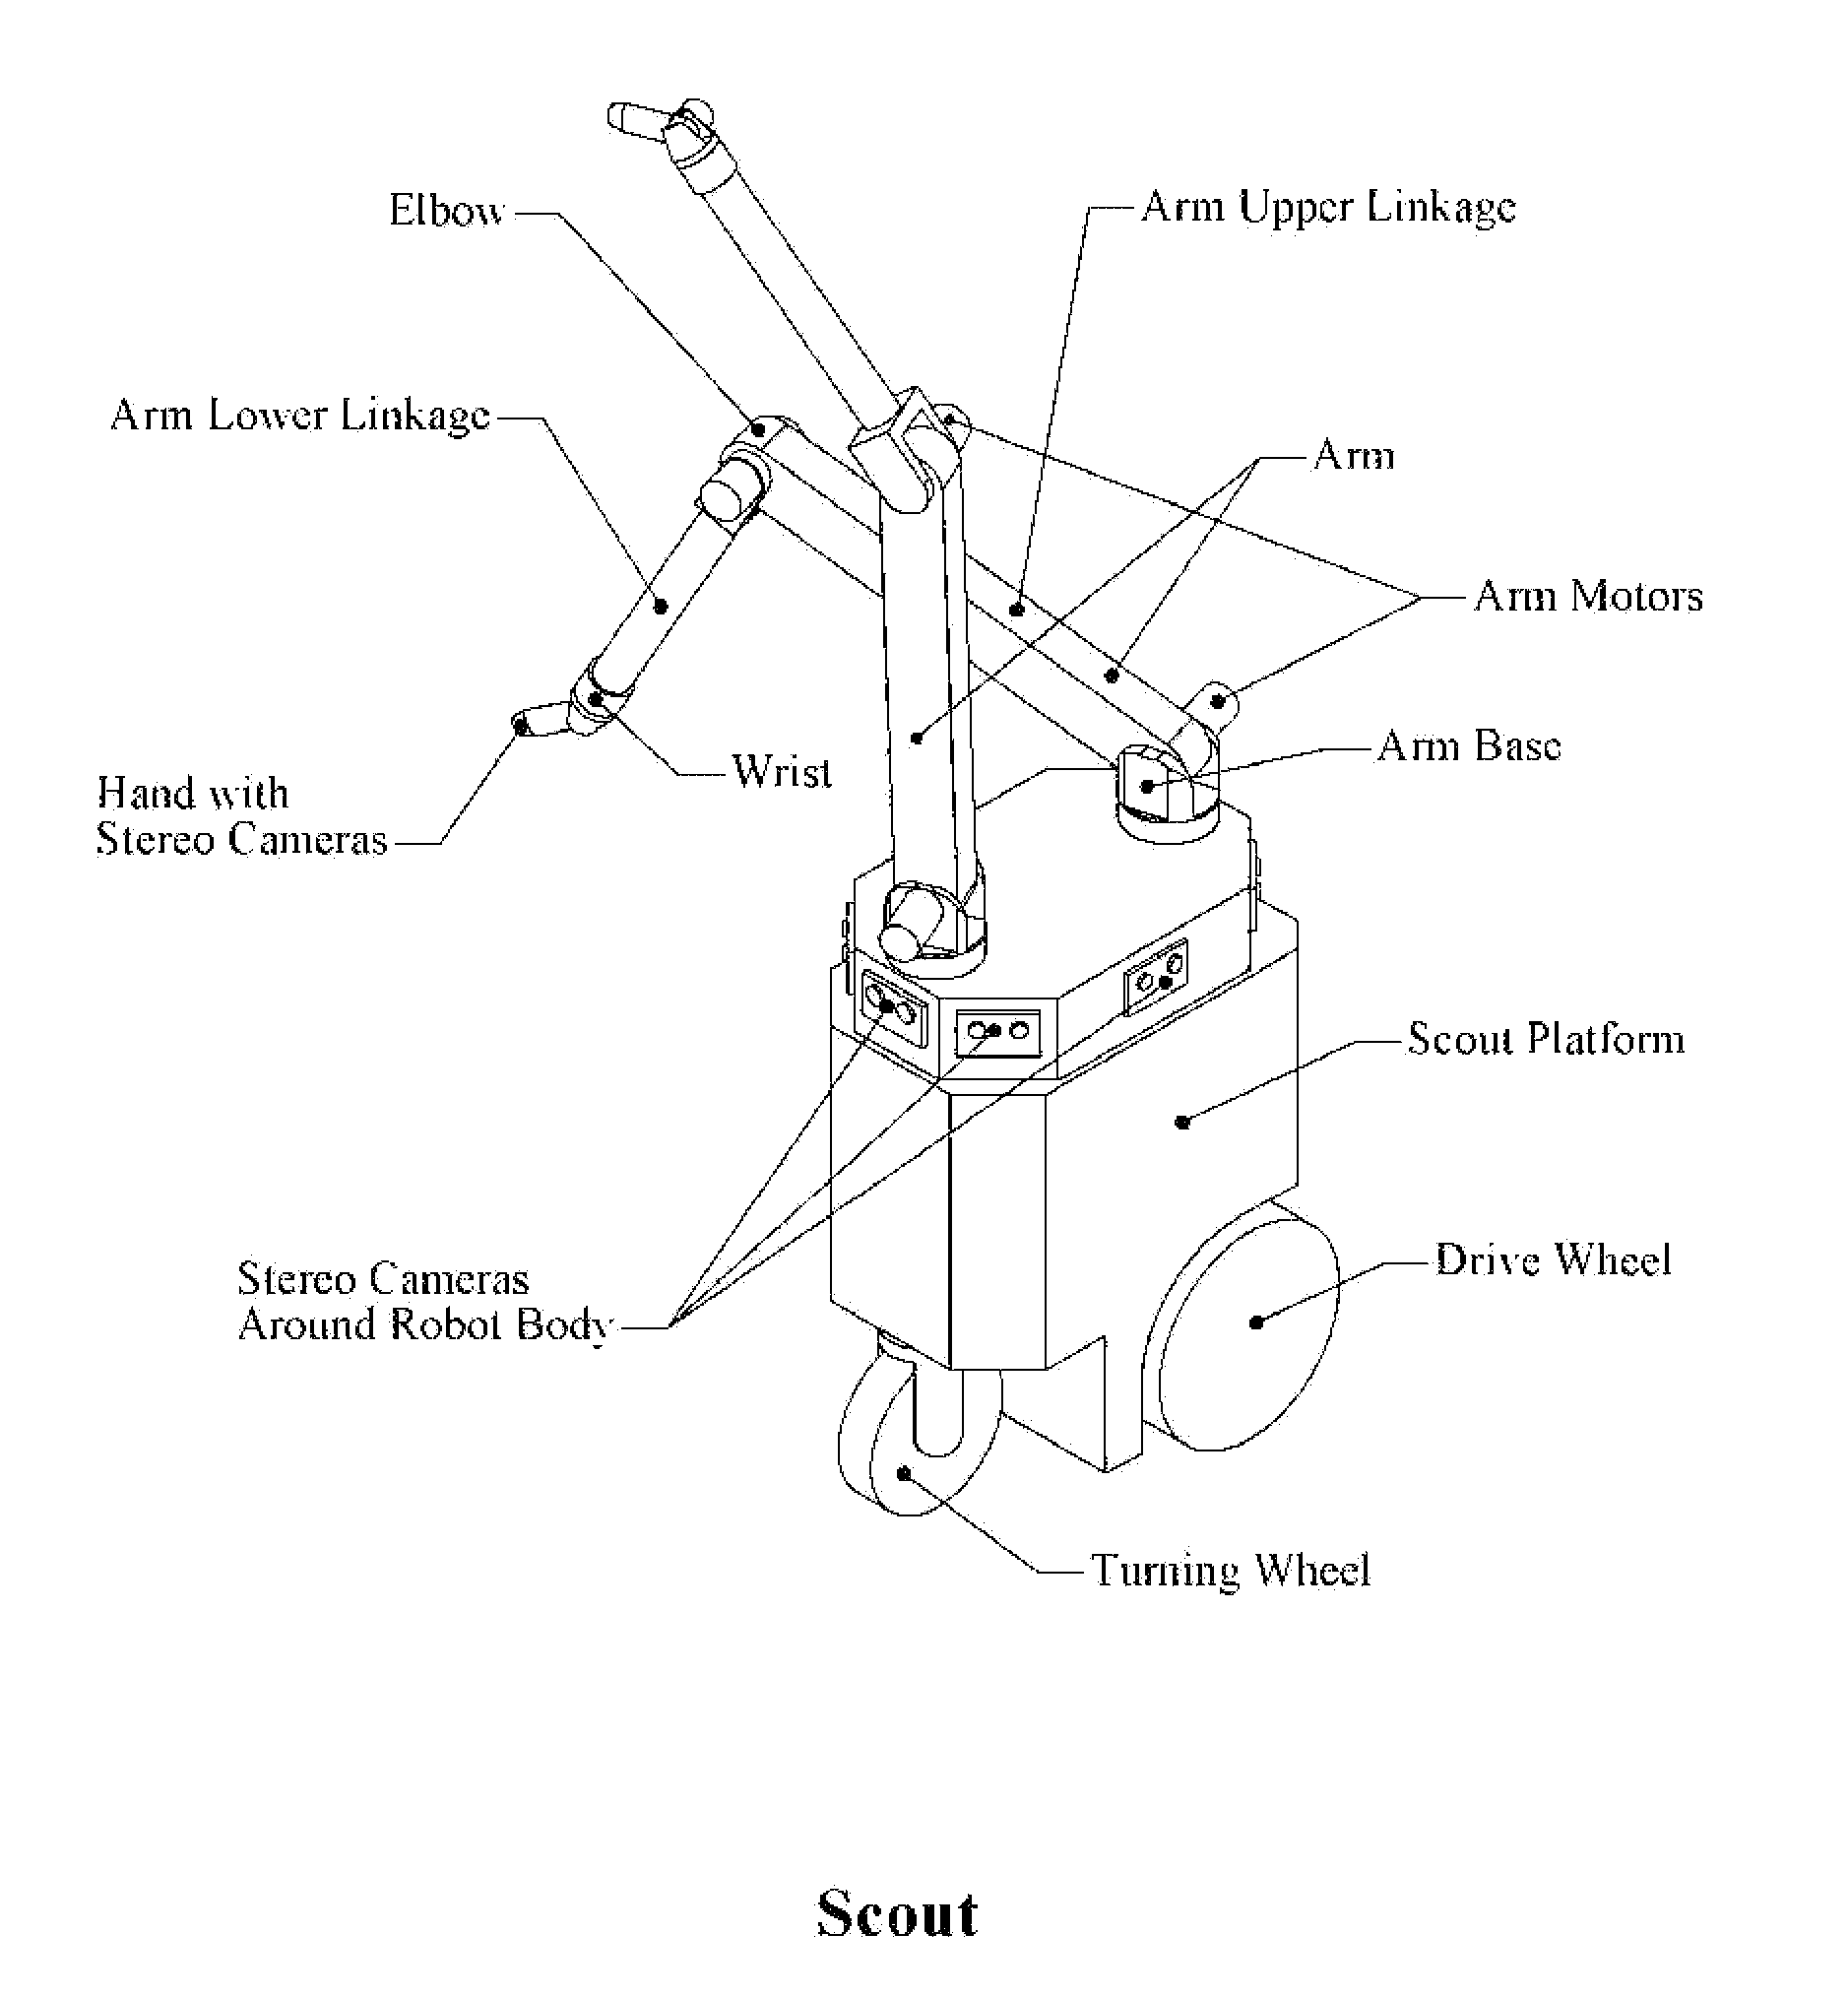 Agricultural robot system and method